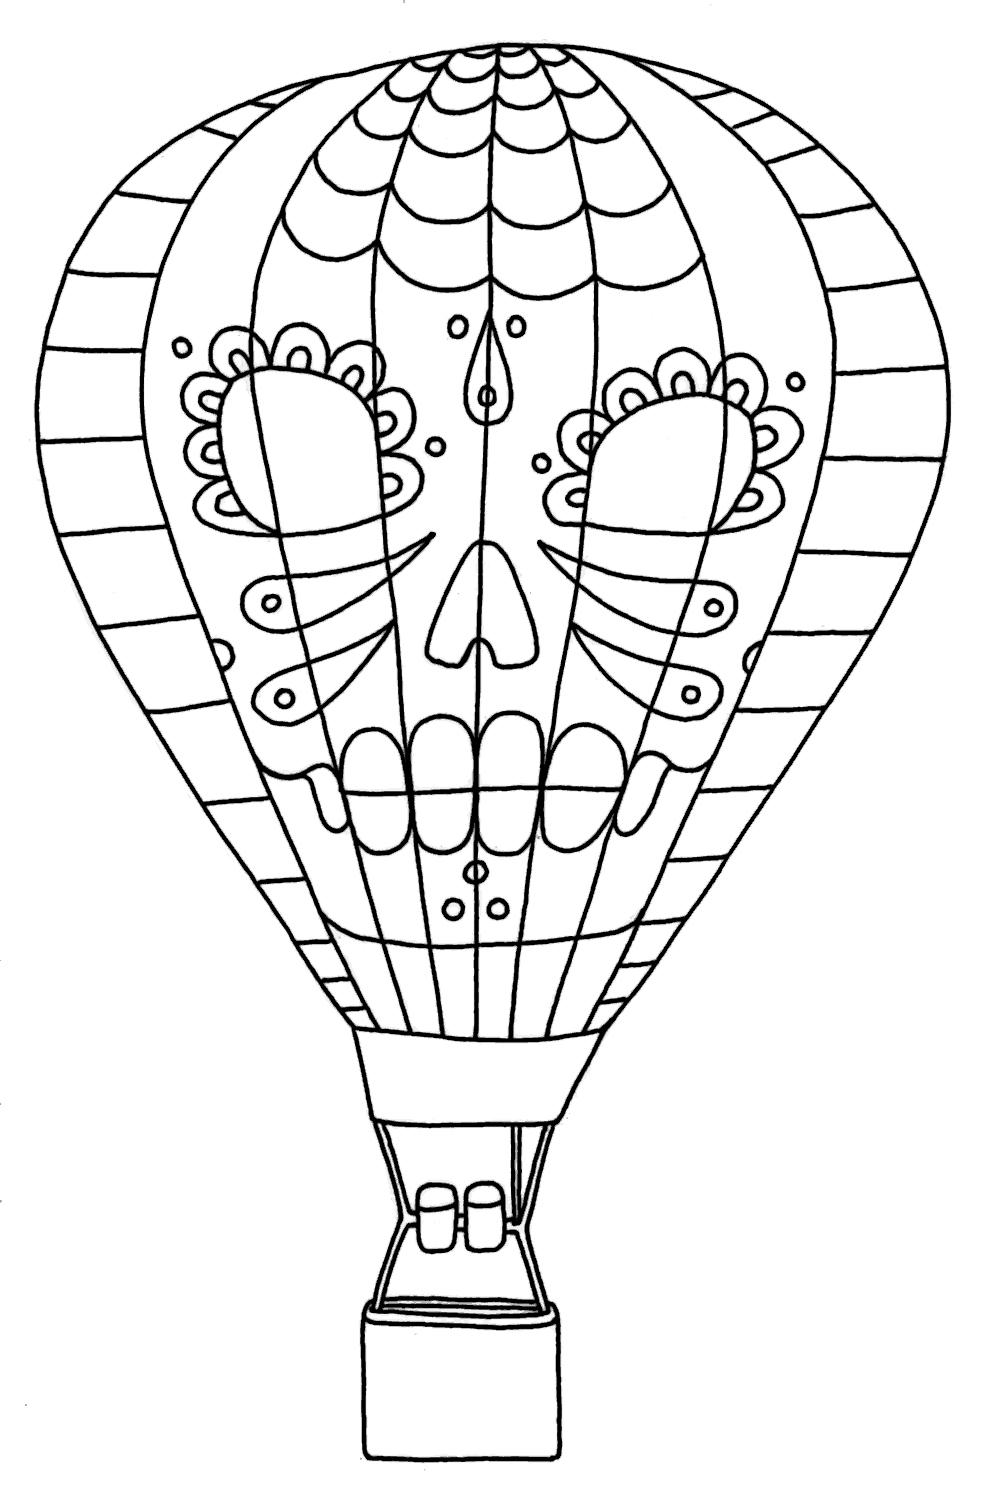 free-printable-hot-air-balloon-coloring-pages-for-kids